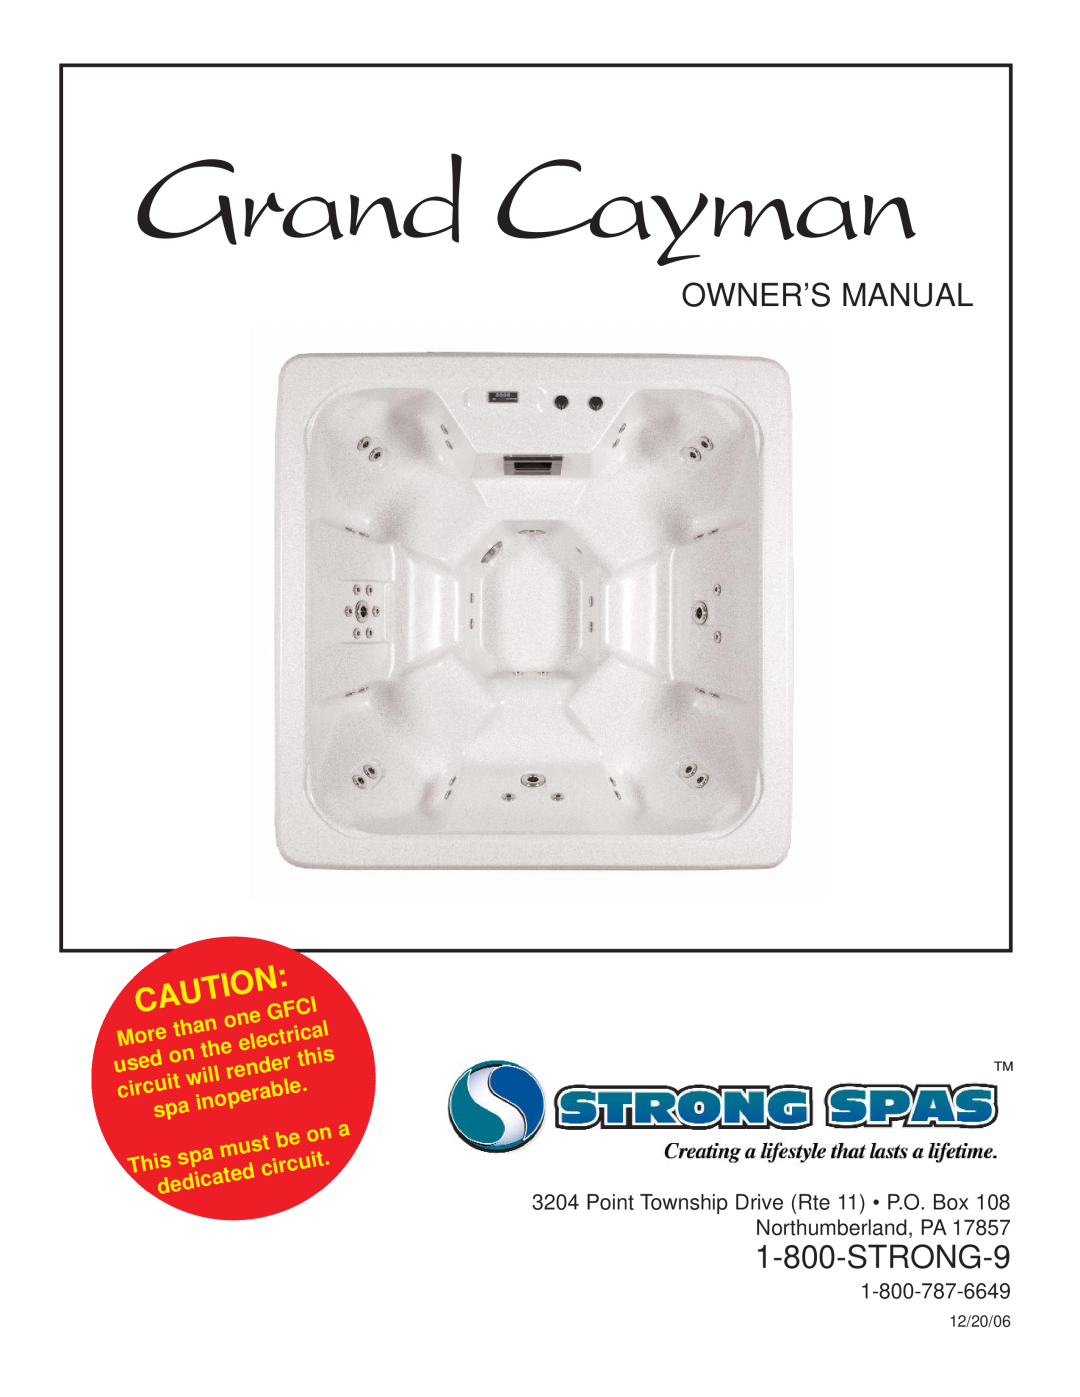 Strong Pools and Spas Grand Cayman Spa owner manual STRONG-9, than, Gfci, More, electrical, used, this, render, will, must 